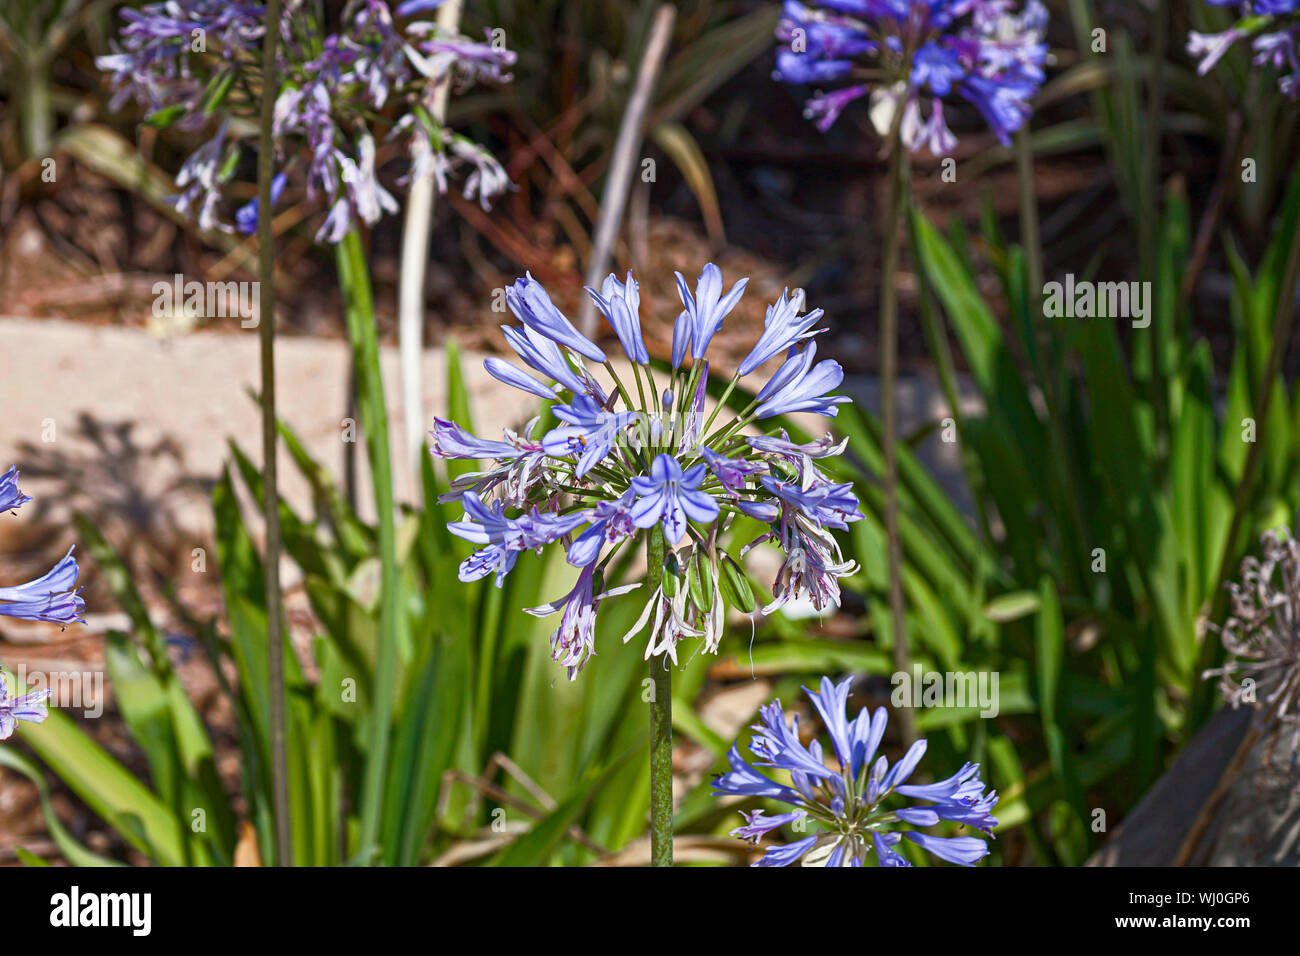 Blue African lily (Agapanthus) flowers in a garden. Stock Photo